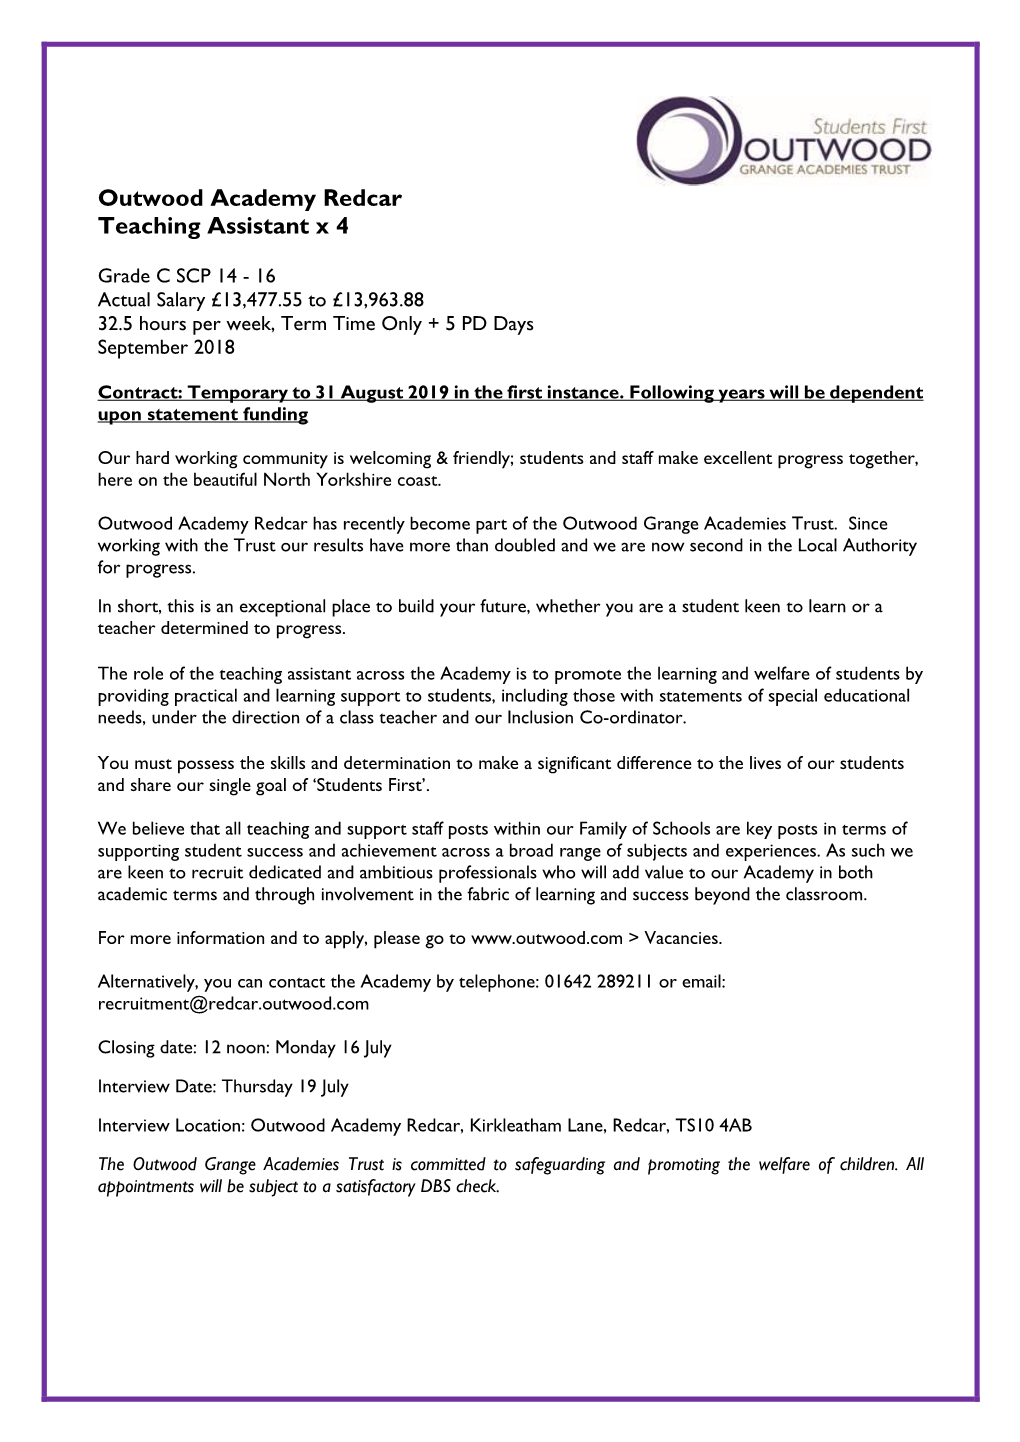 Outwood Academy Redcar Teaching Assistant X 4